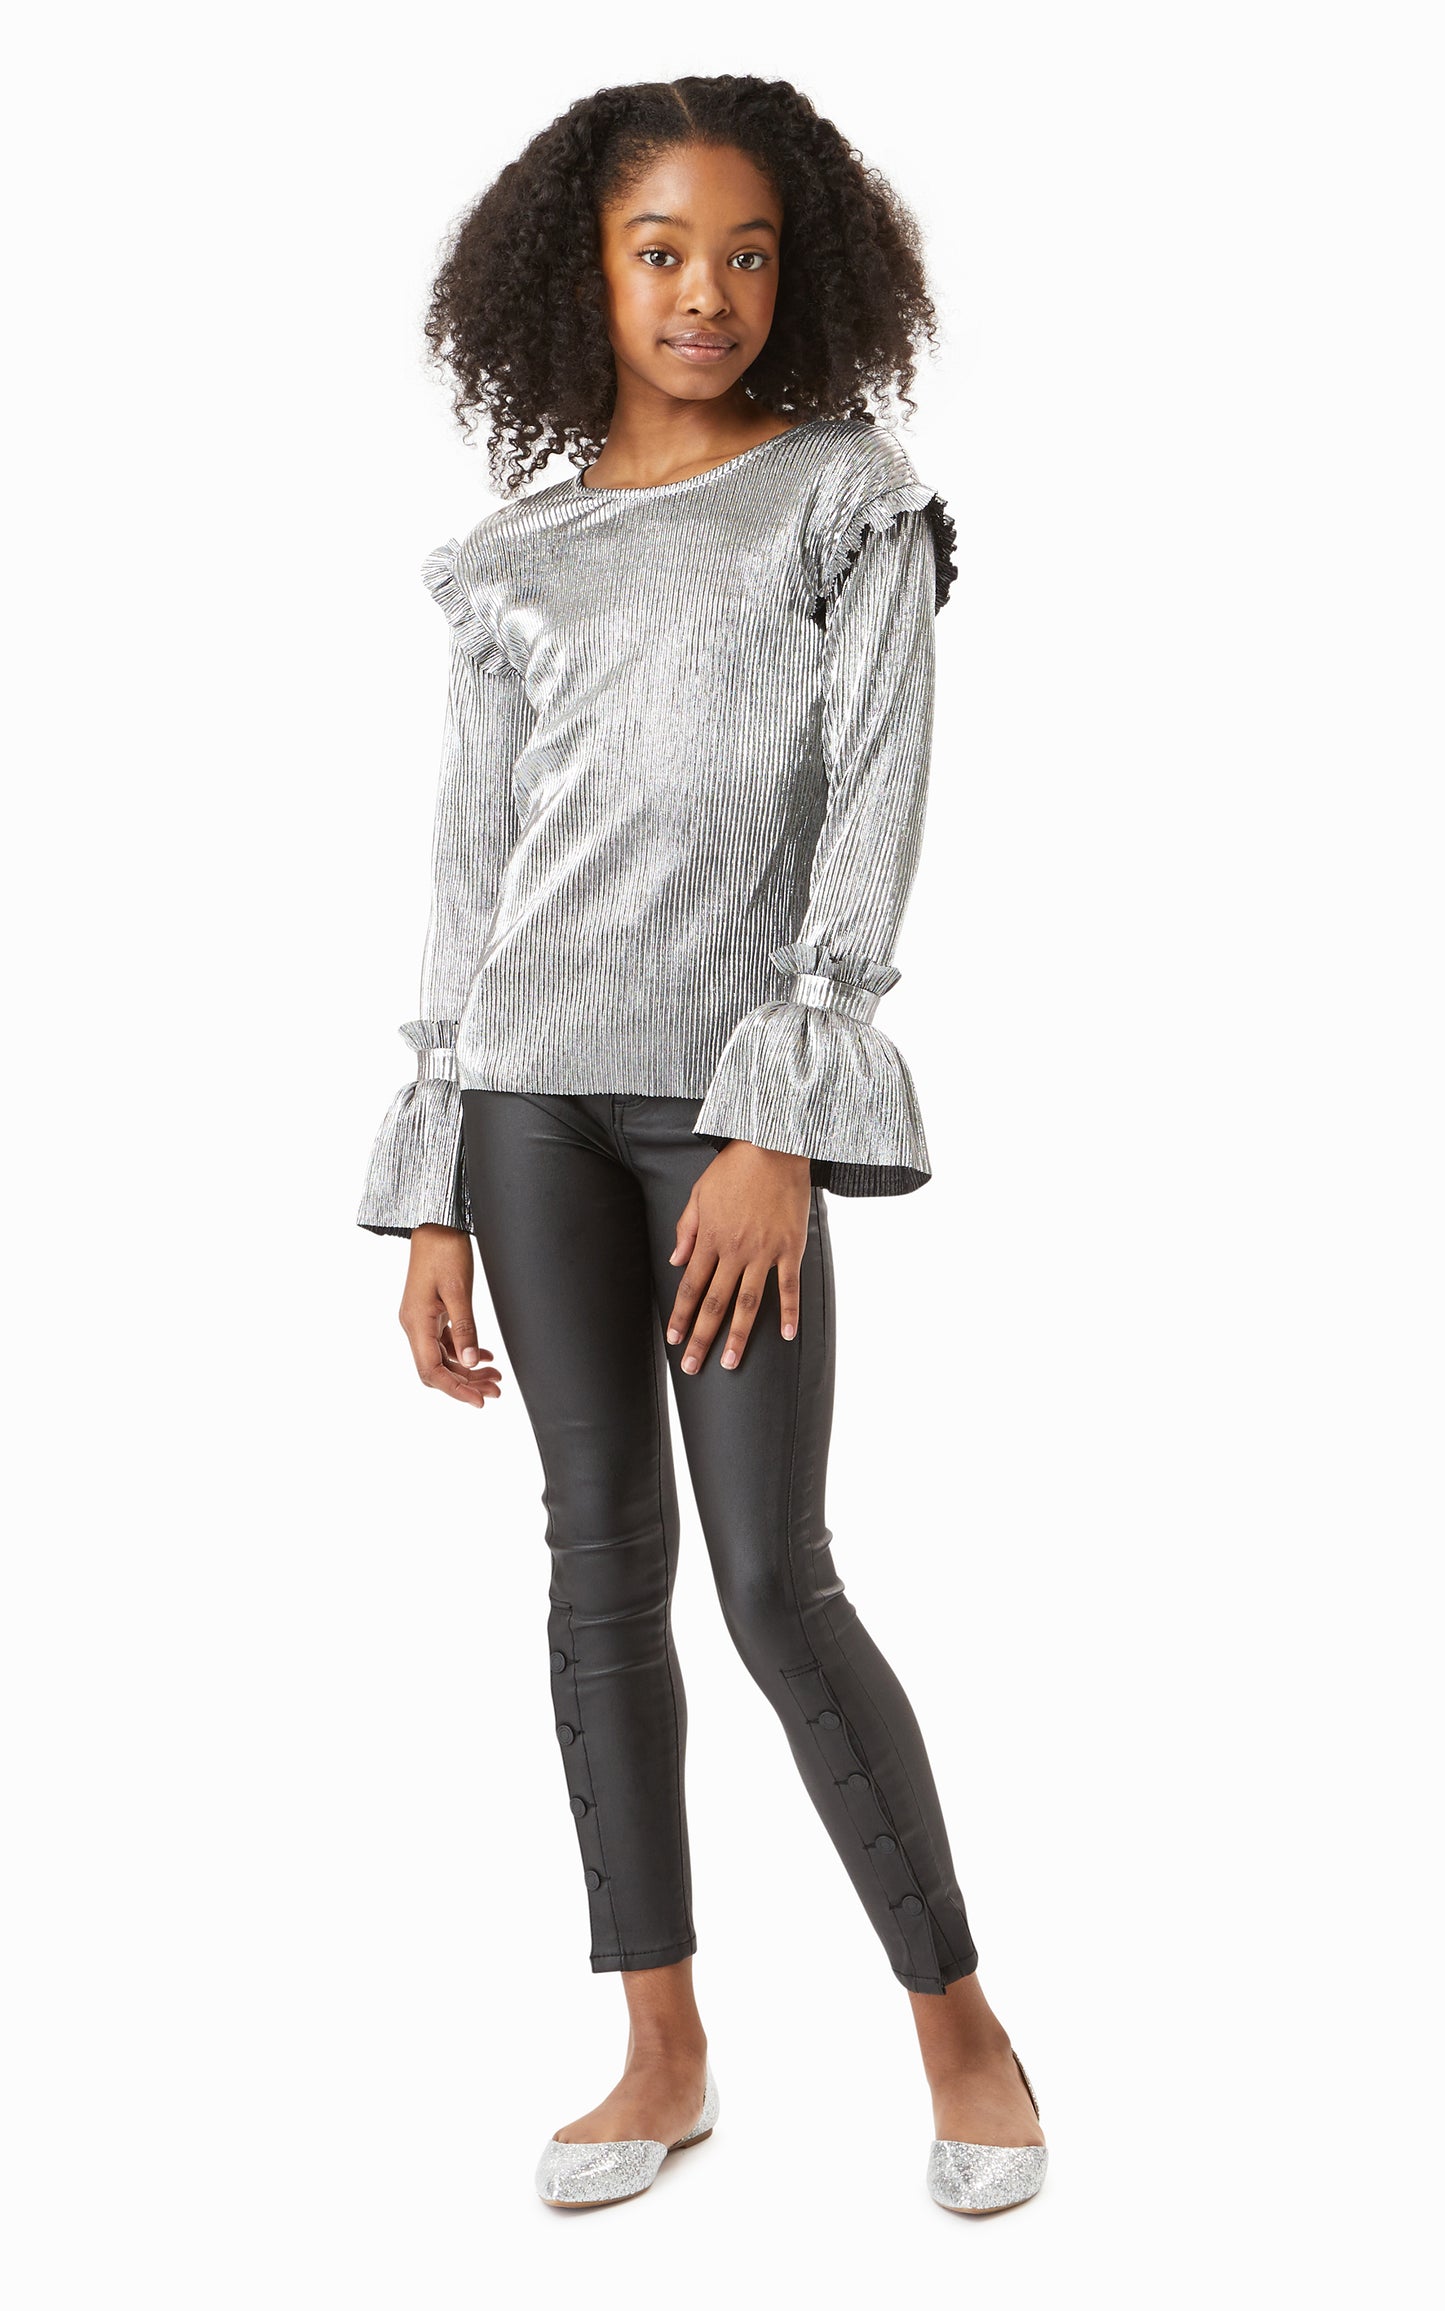 Girl wearing metallic silver long-sleeve top with leather-look skinny jeans. 